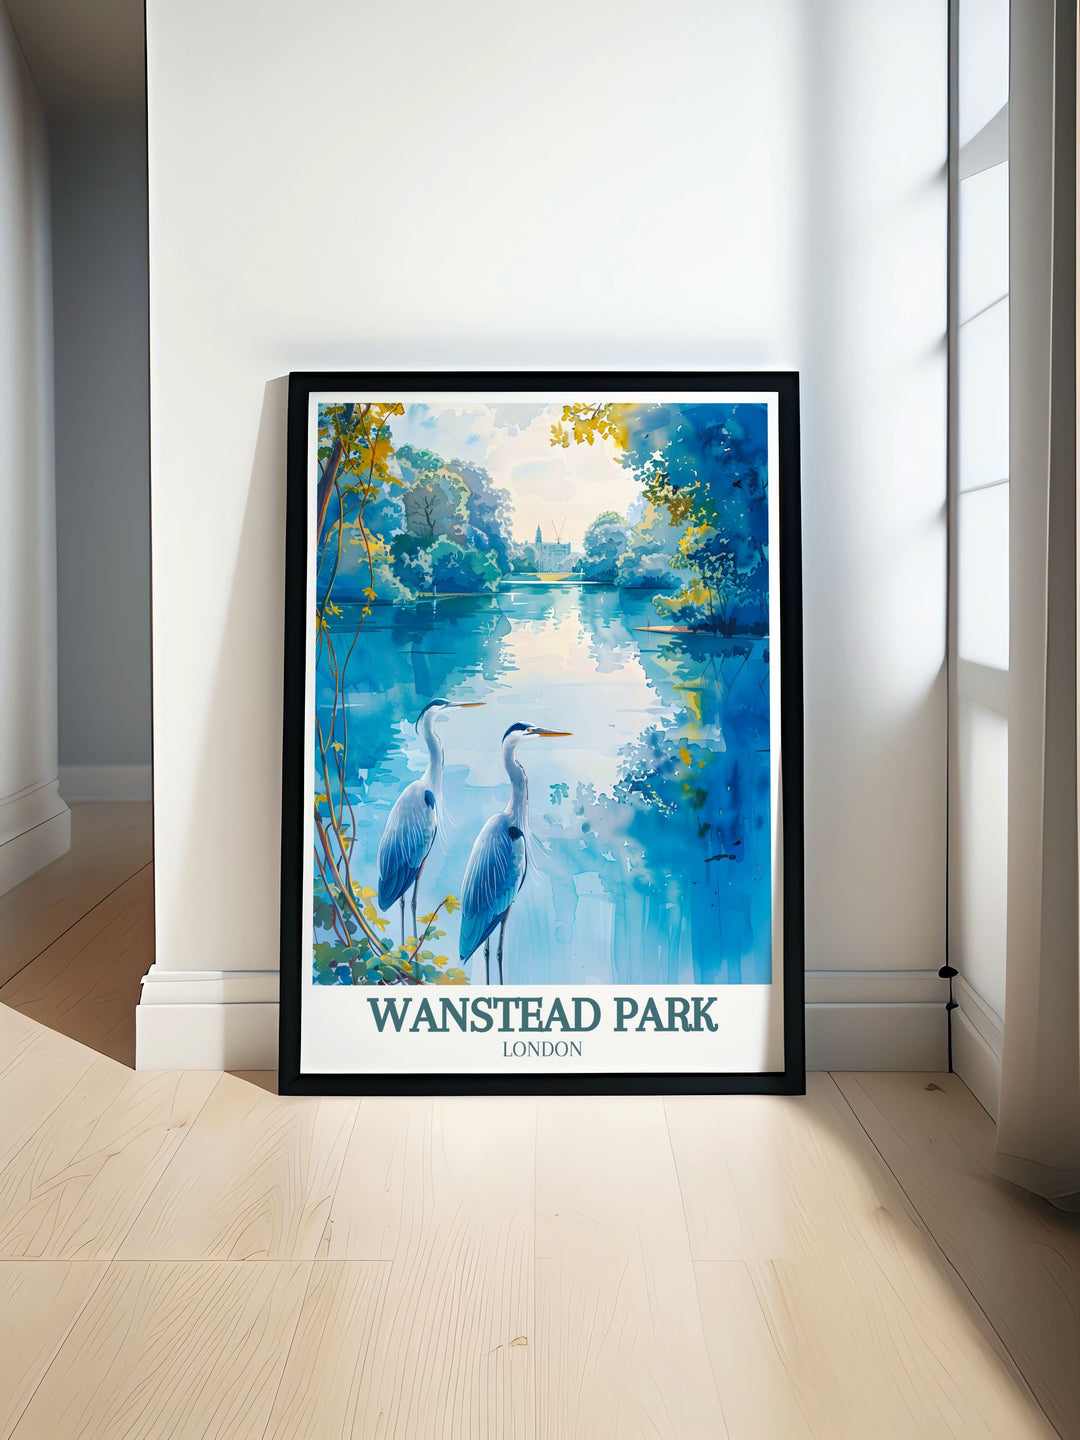 A stunning vintage travel print of Wanstead Park showcasing the lush greenery and serene landscapes of East London. Perfect for nature lovers and art enthusiasts looking to bring a piece of Londons natural beauty into their home decor collection.